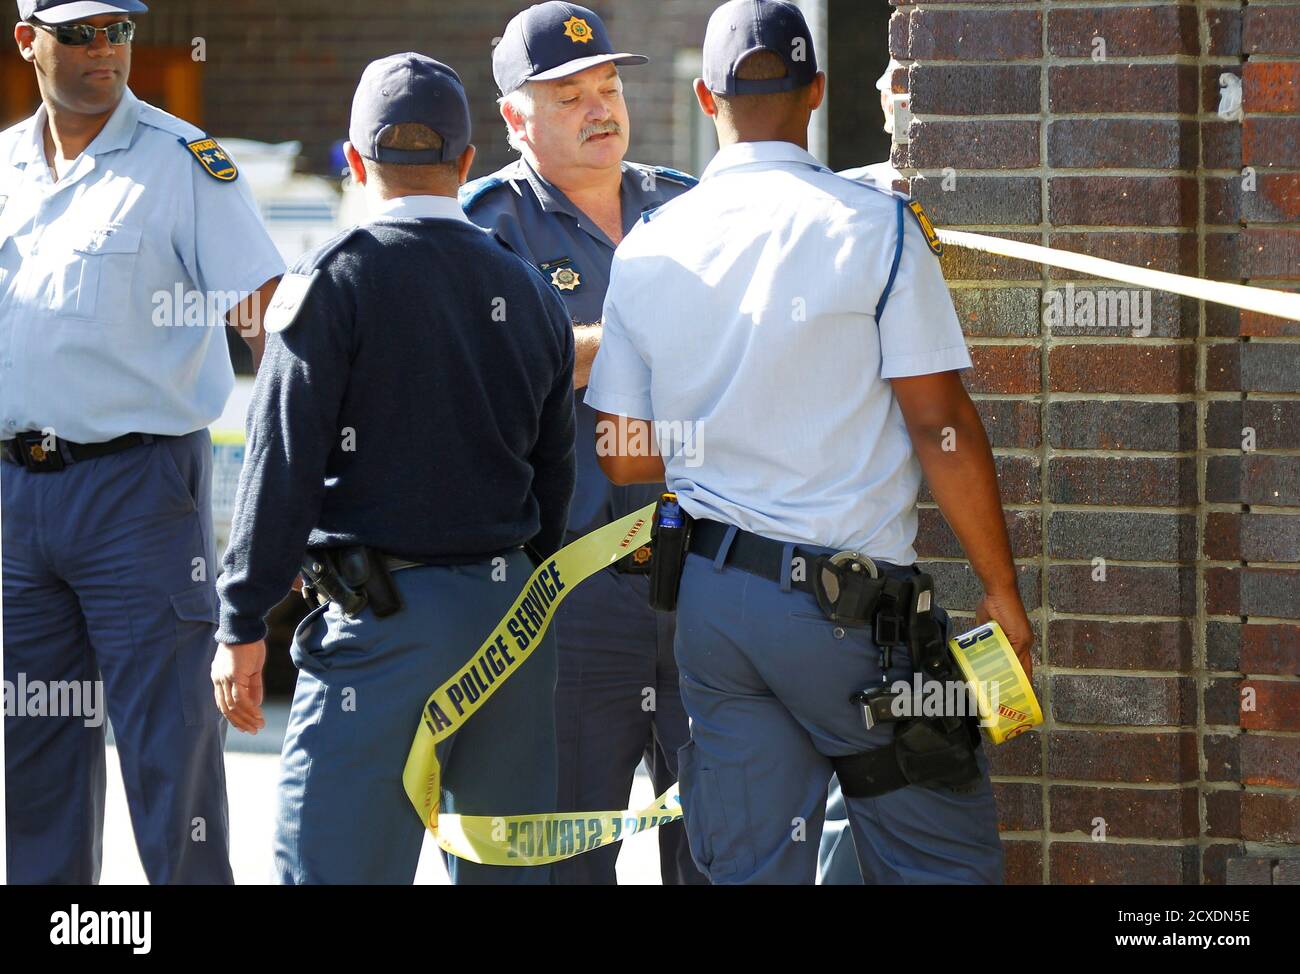 Police cordon off an area outside a Cape Town court as they await the  arrival of three men accused of killing a British tourist during her  honeymoon visit to South Africa, December